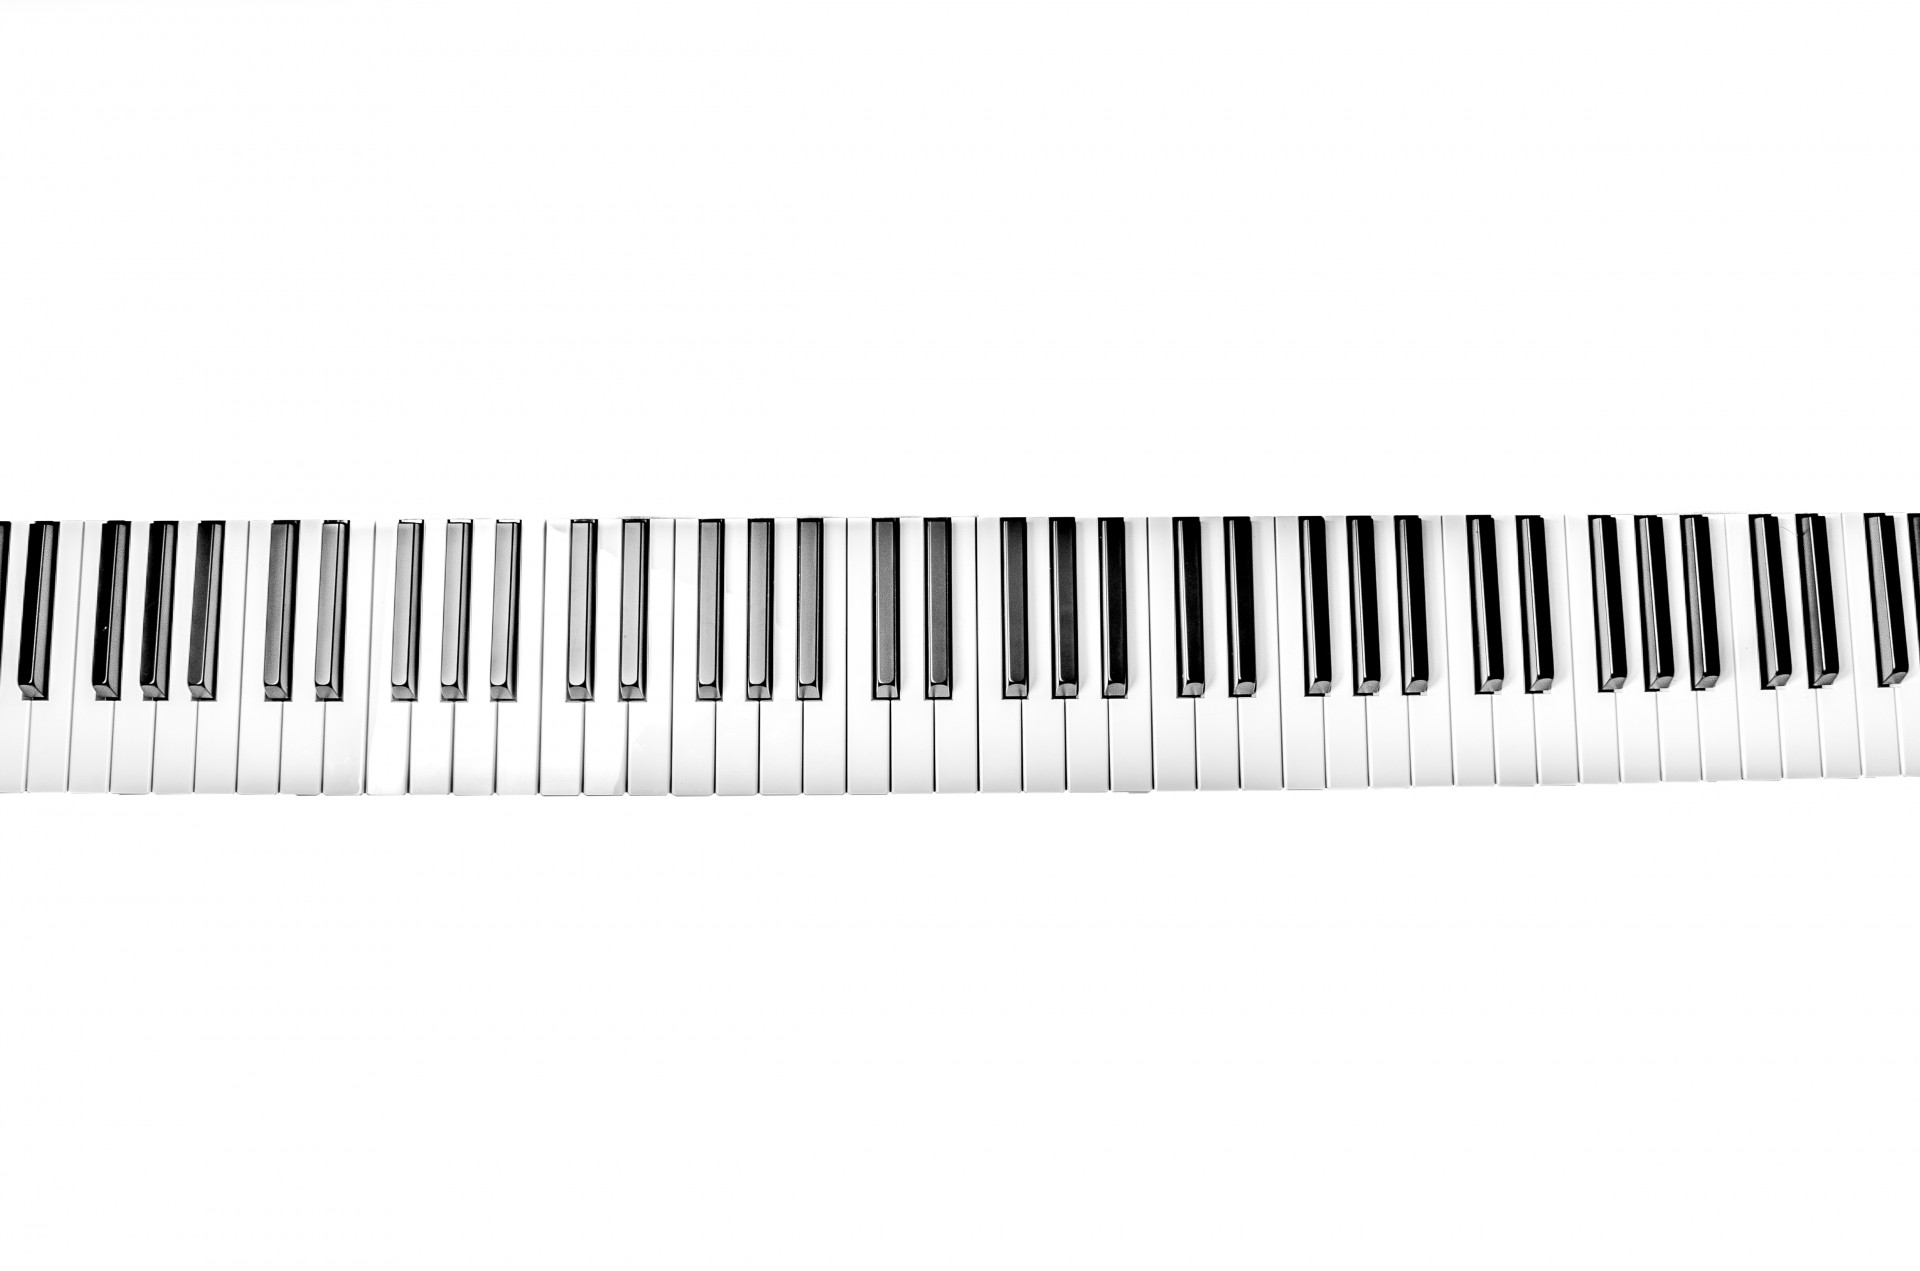 Piano keys on the white background